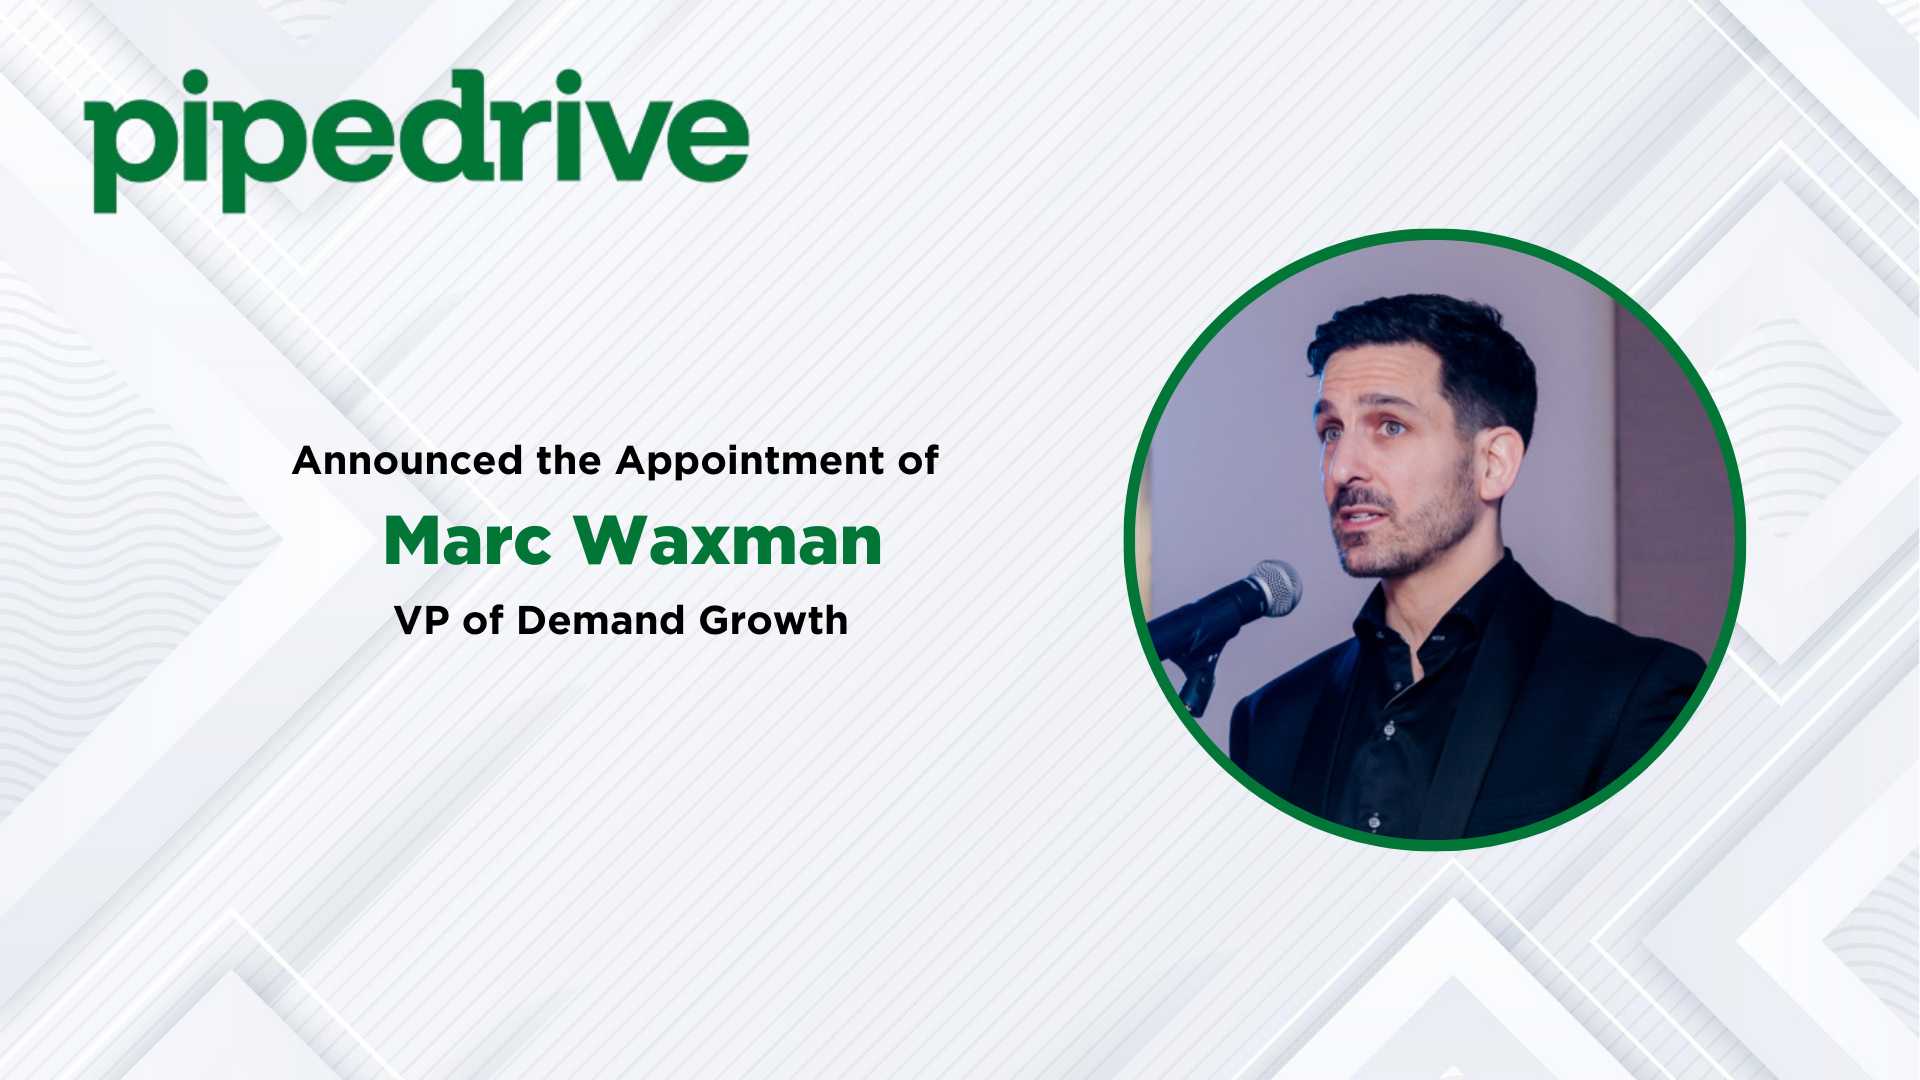 Accomplished B2B Marketing Expert Marc Waxman Joins Pipedrive as VP of Demand Growth